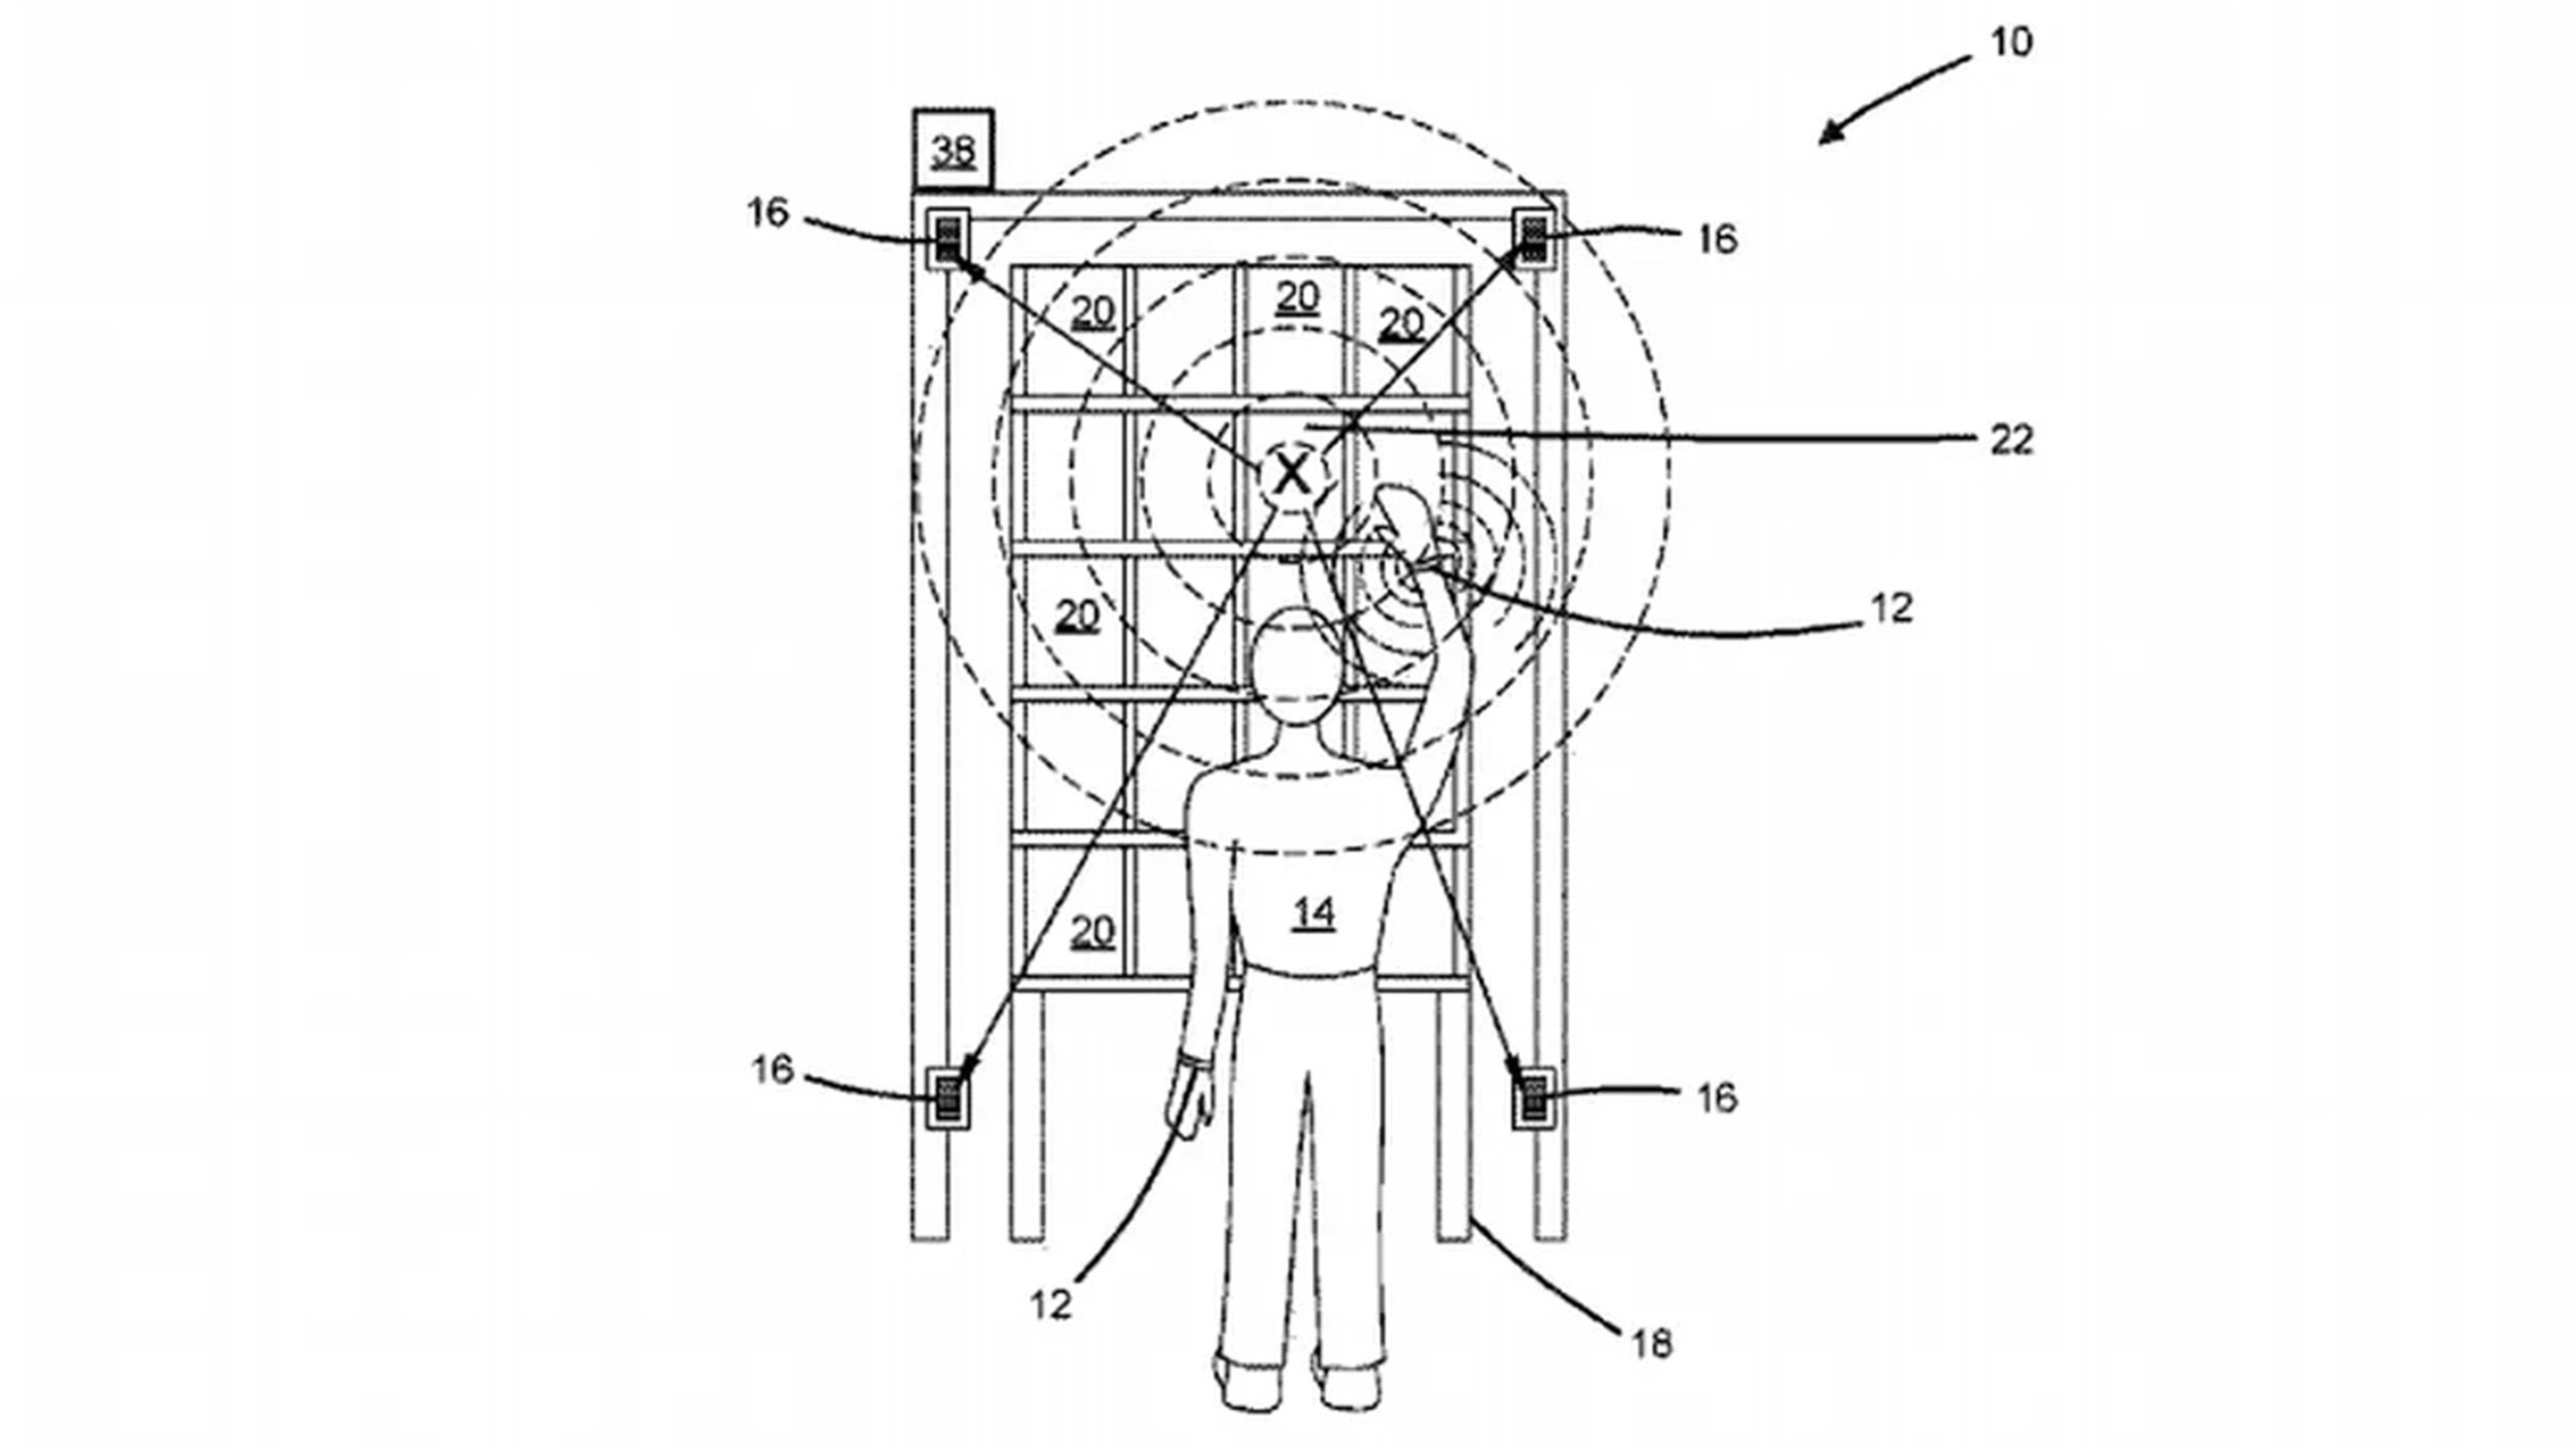 Amazon just patented some creepy “Black Mirror”-esque tracking wristbands